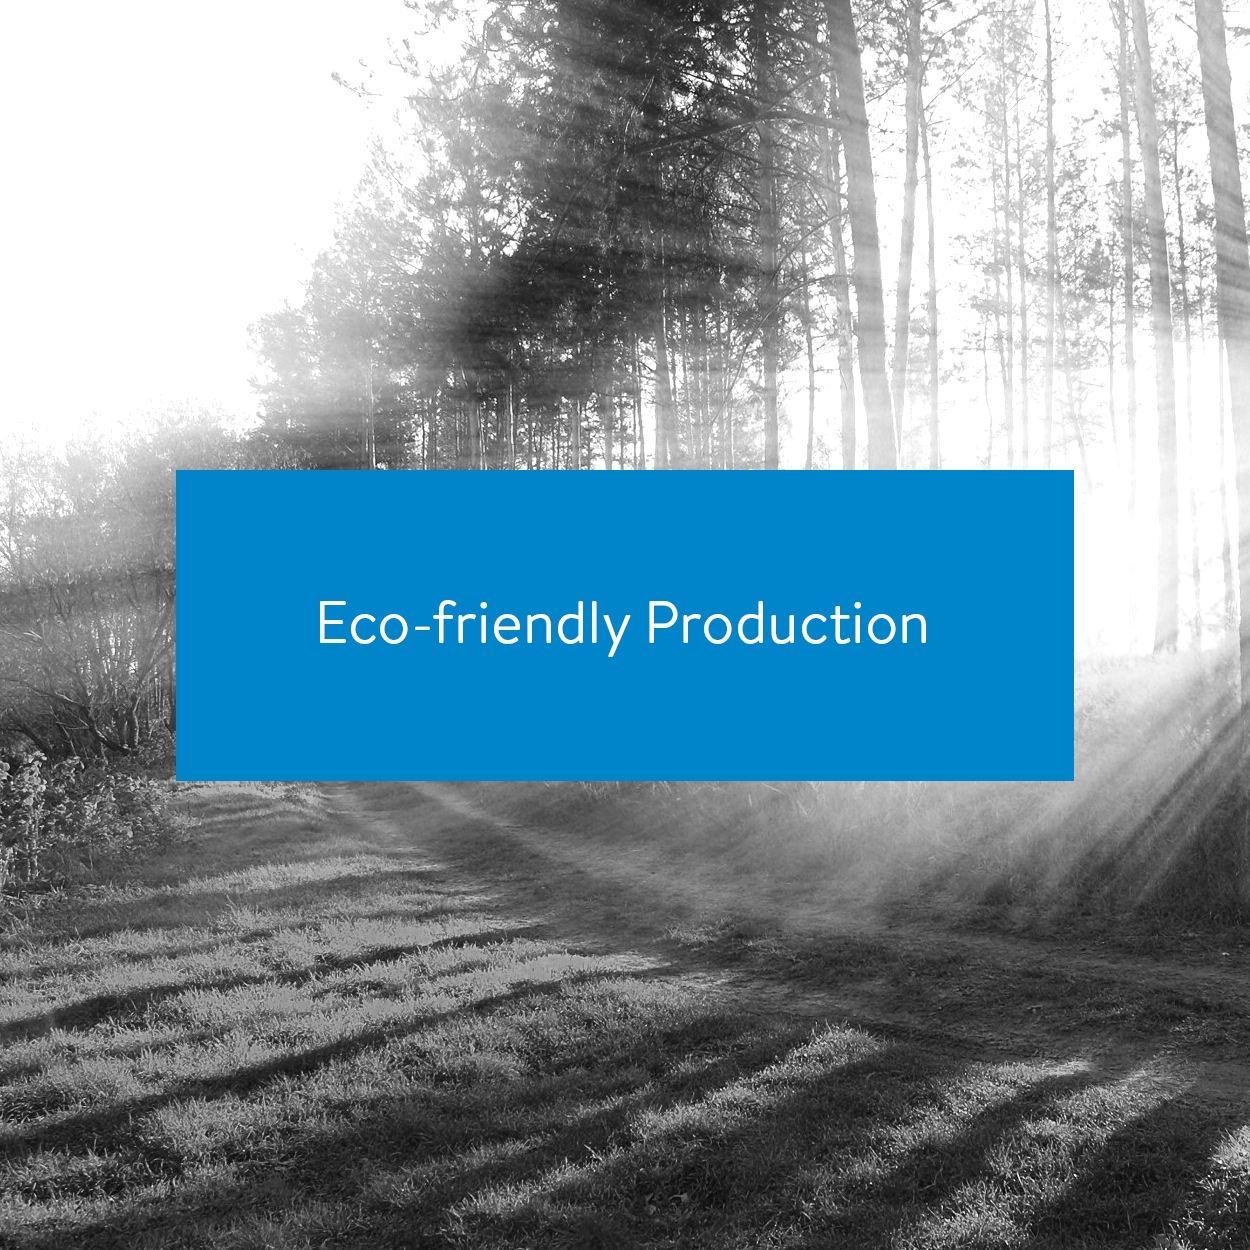 Eco-friendly production